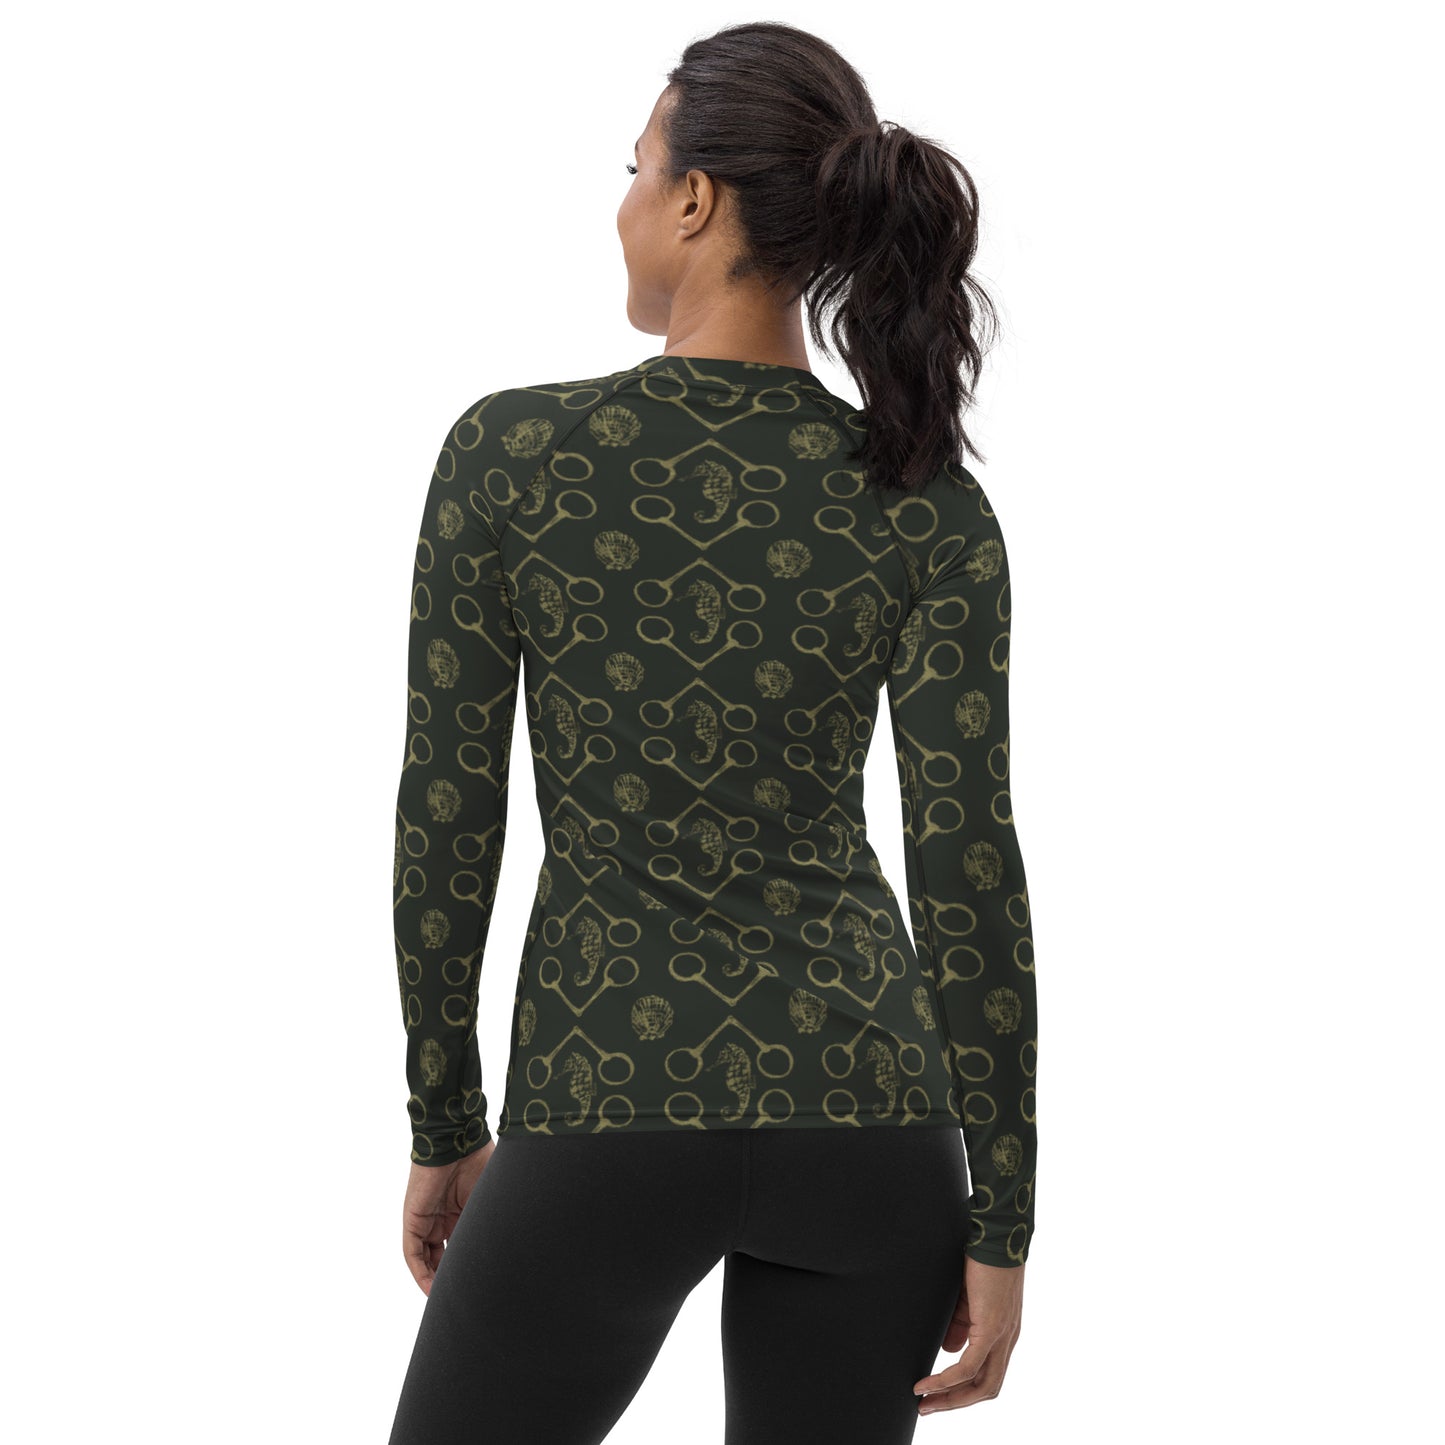 Sea horse and bits - Olive and gold Women's Rash Guard